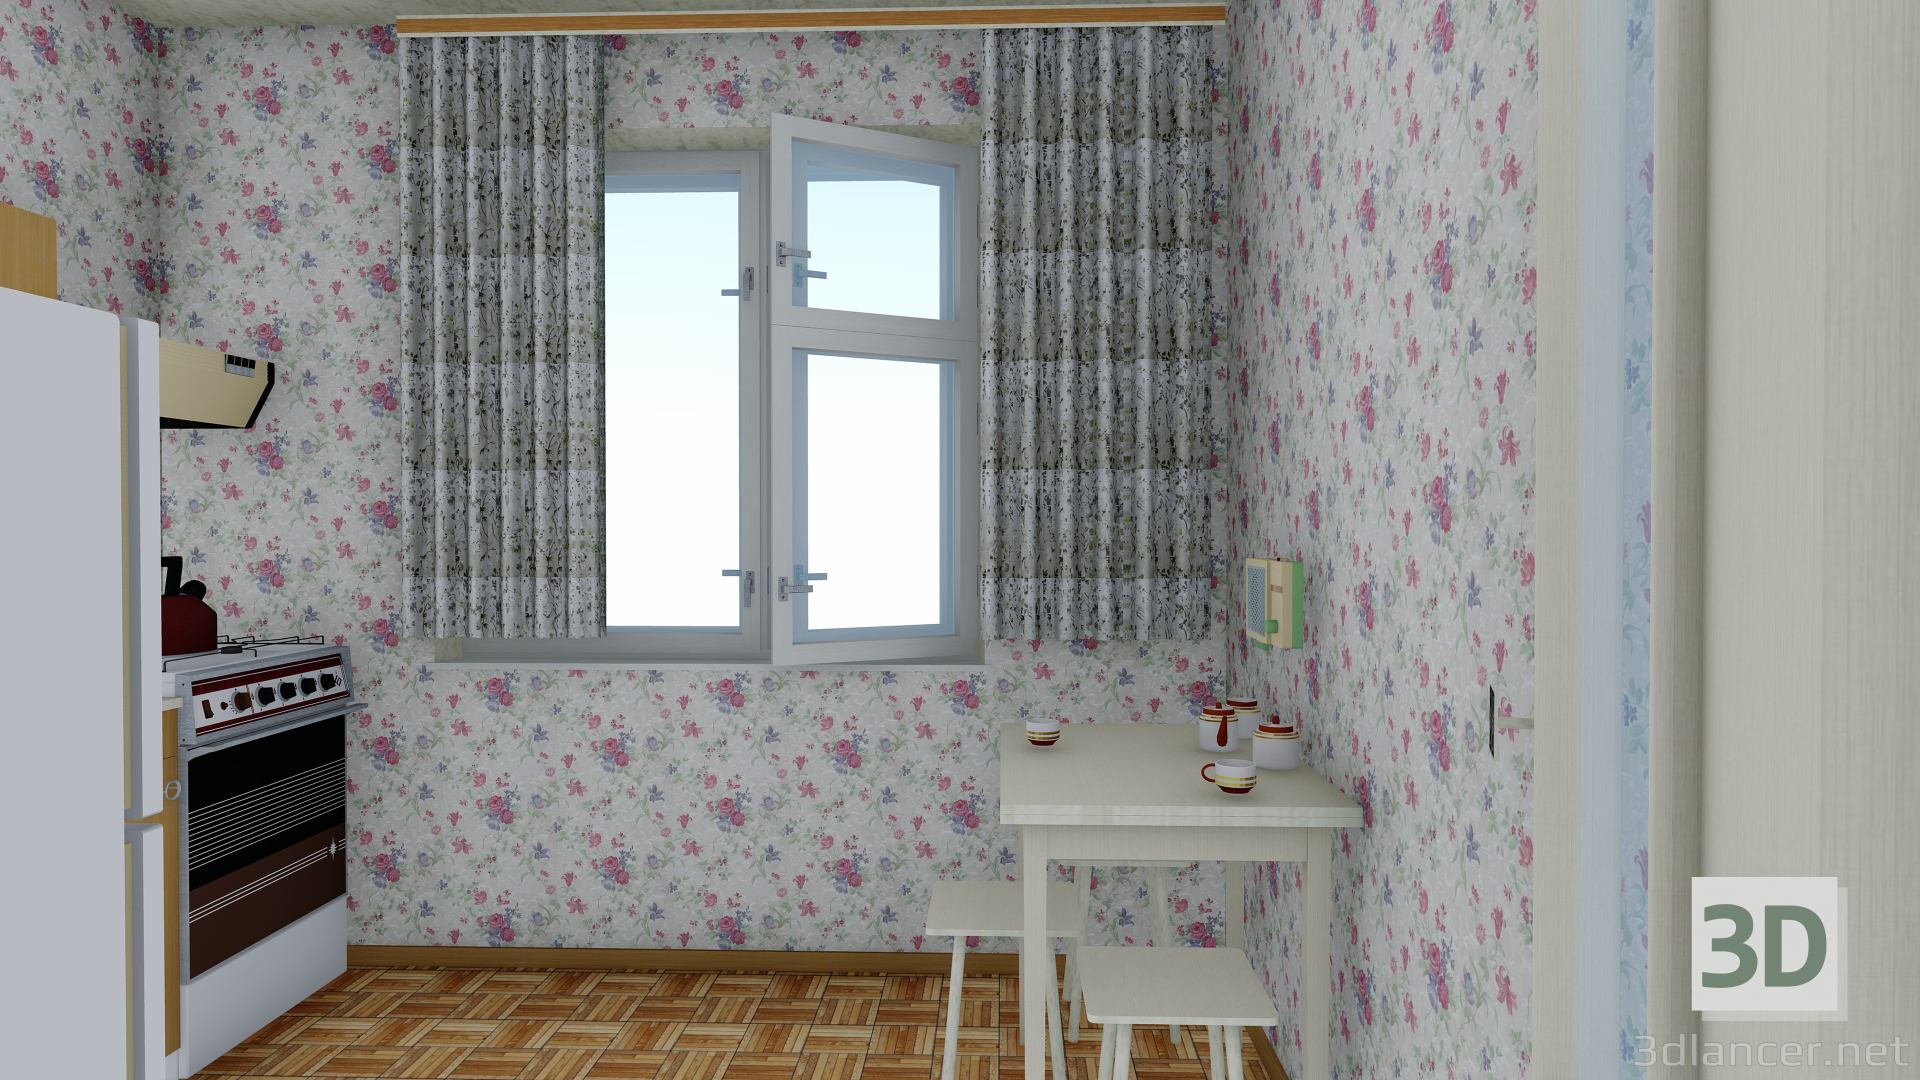 3d Panel five-story building with a Soviet apartment from the 80s model buy - render